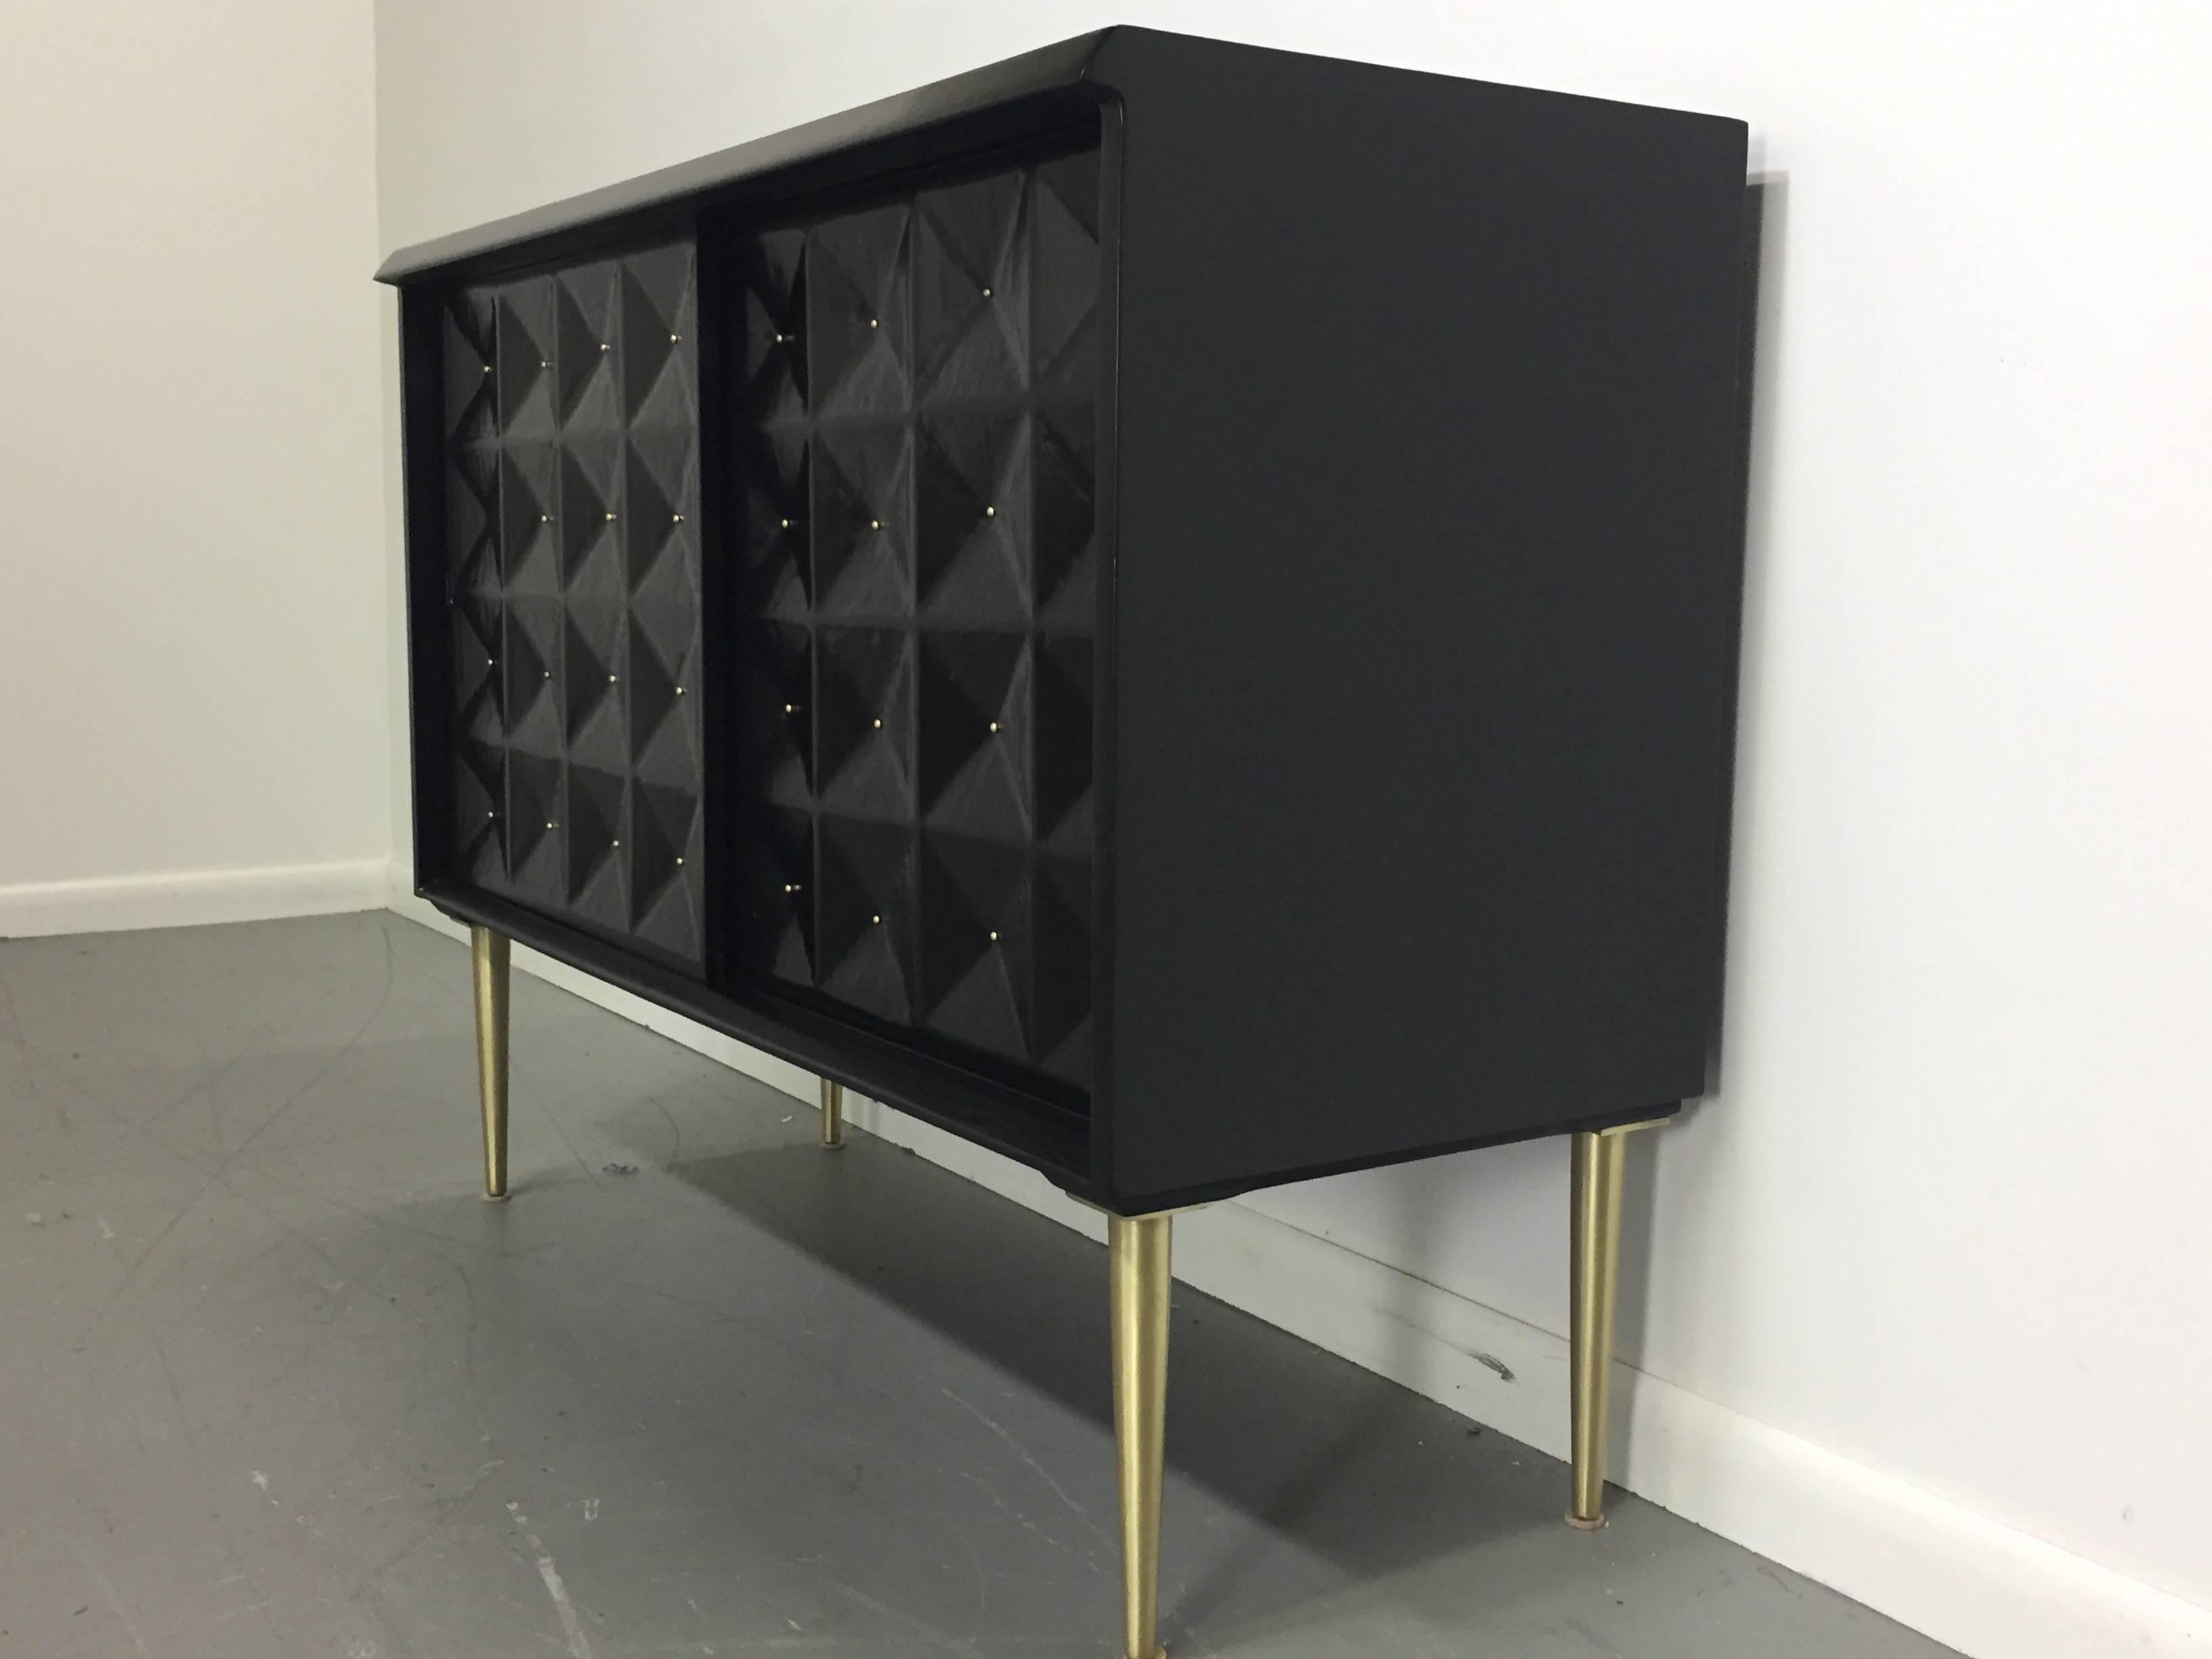 Petite sideboard with hand-carved inverted diamond shaped decorations with brass inserts on the two sliding front doors. This piece has two drawers on one side and one shelf on the other. The case has been ebonized and the legs have been